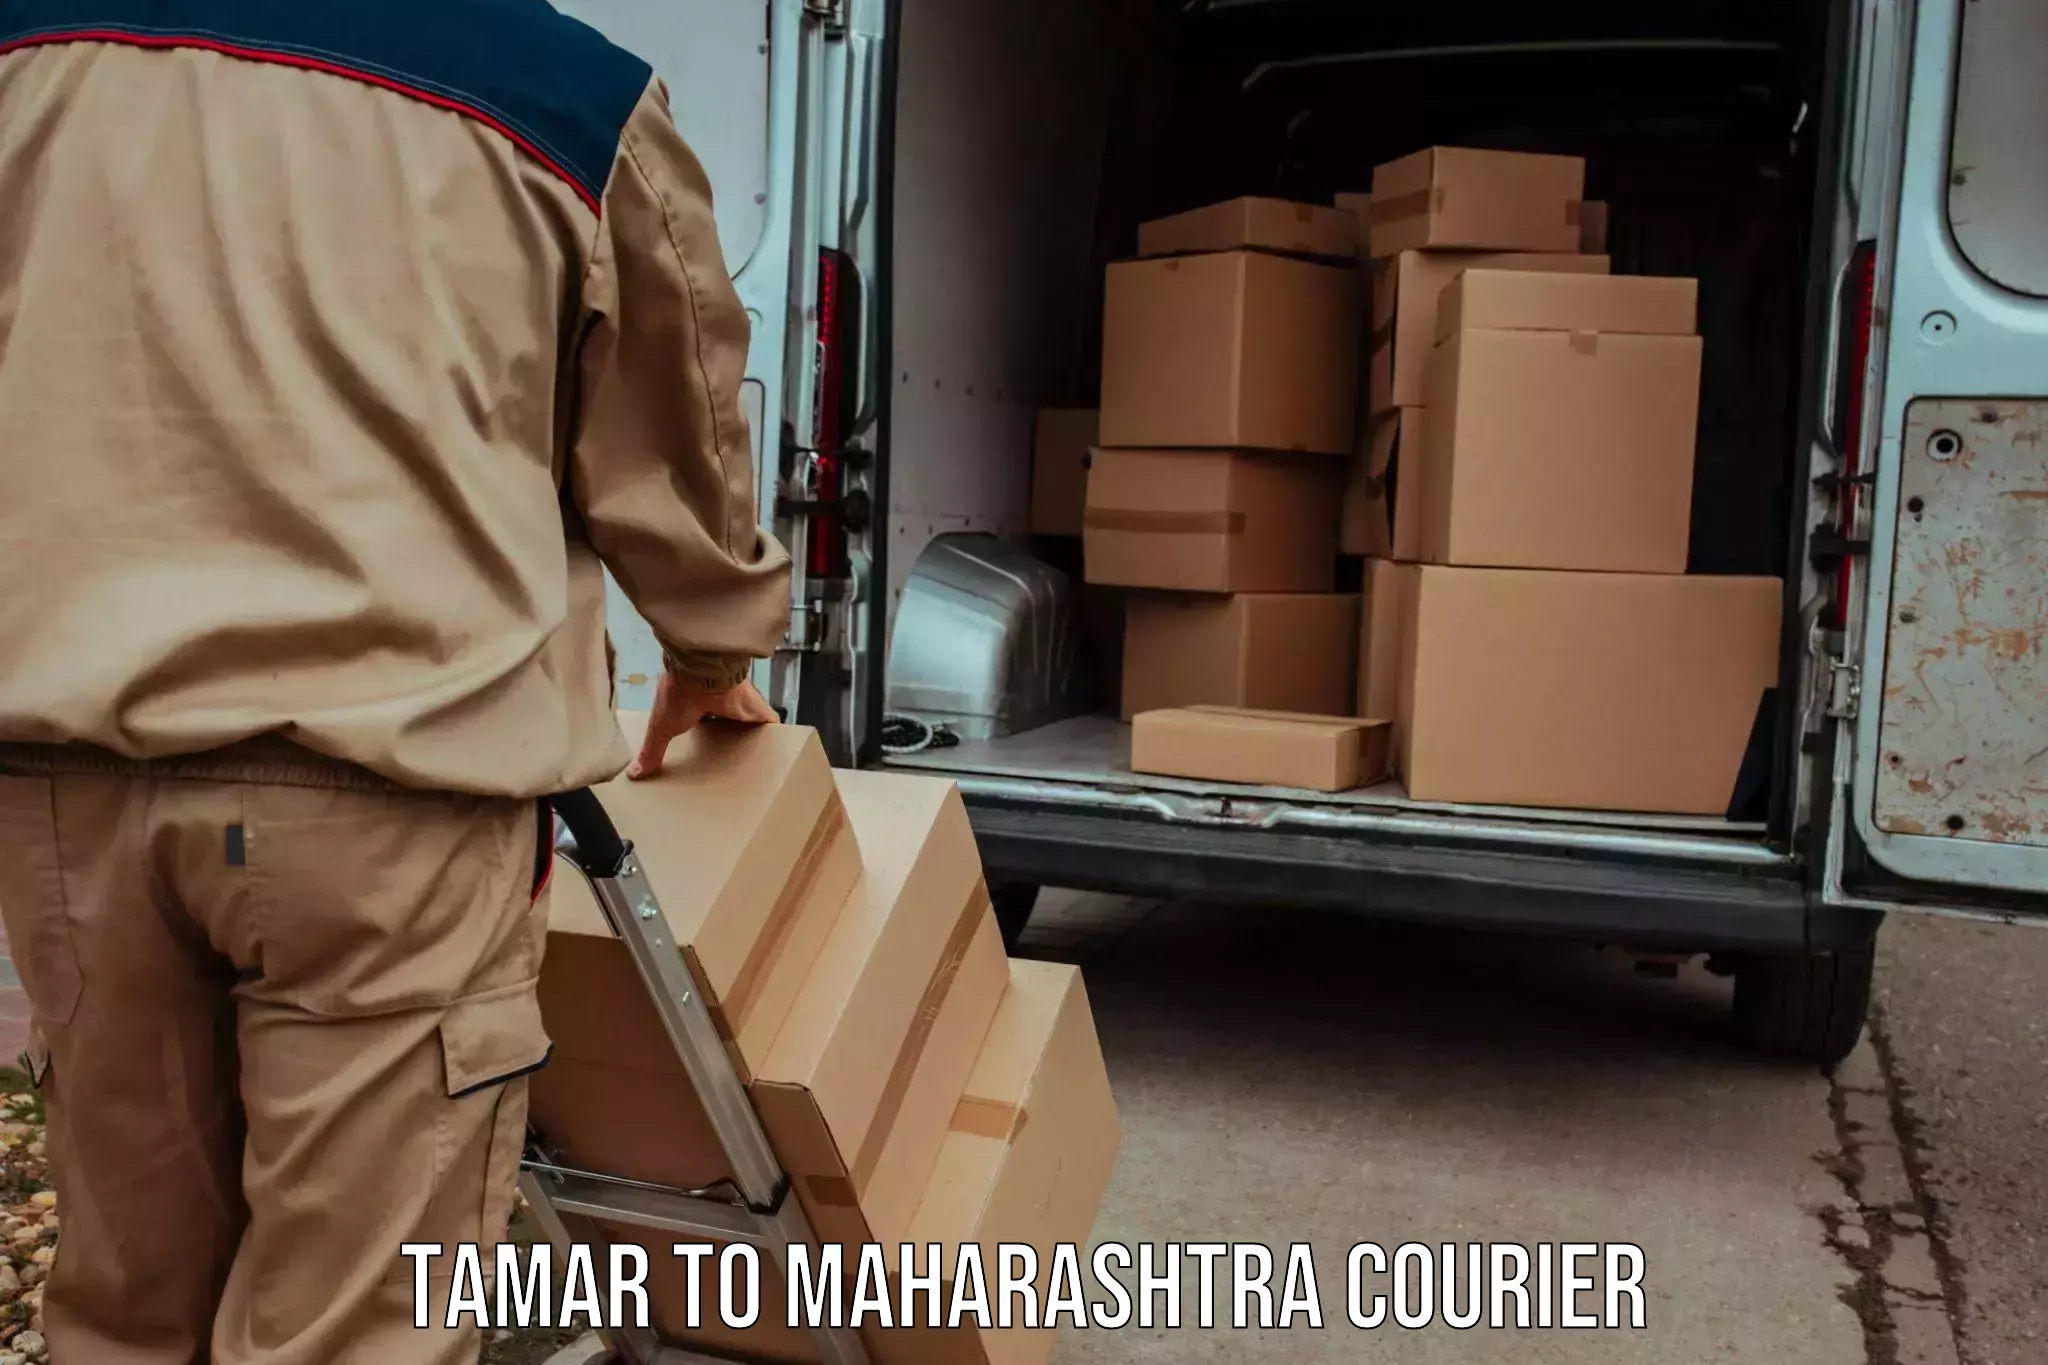 Overnight delivery services Tamar to Mumbai